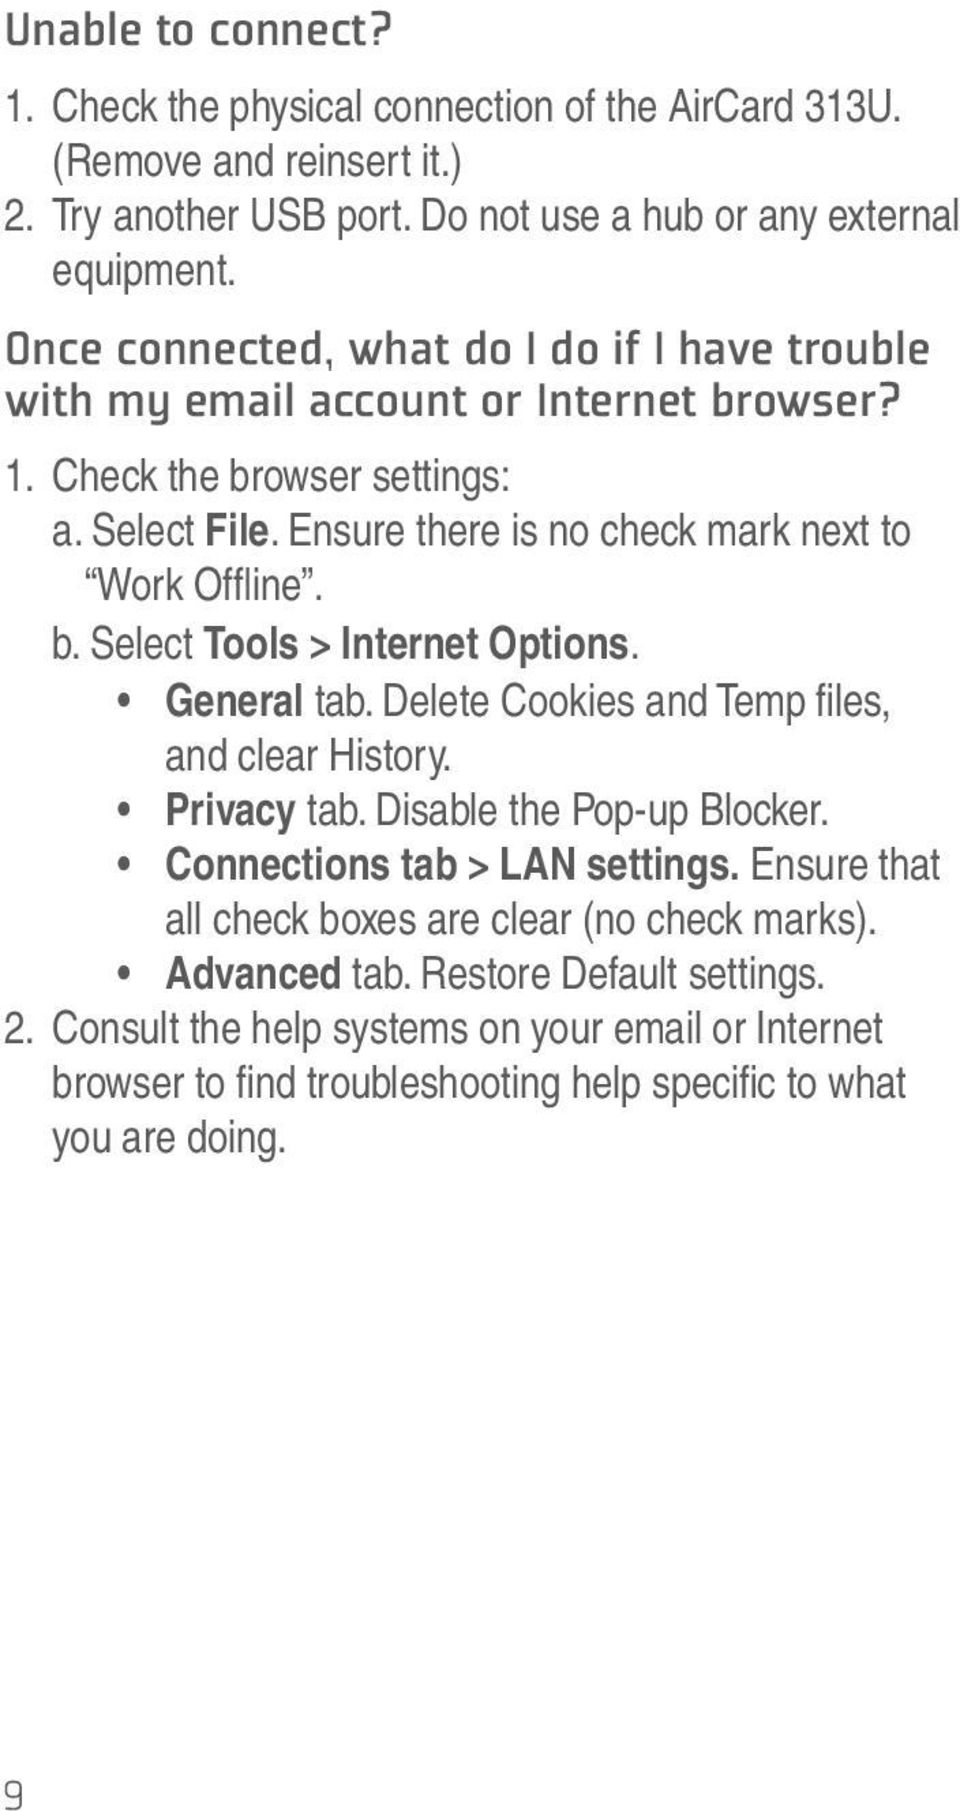 b. Select Tools > Internet Options. General tab. Delete Cookies and Temp fi les, and clear History. Privacy tab. Disable the Pop-up Blocker. Connections tab > LAN settings.